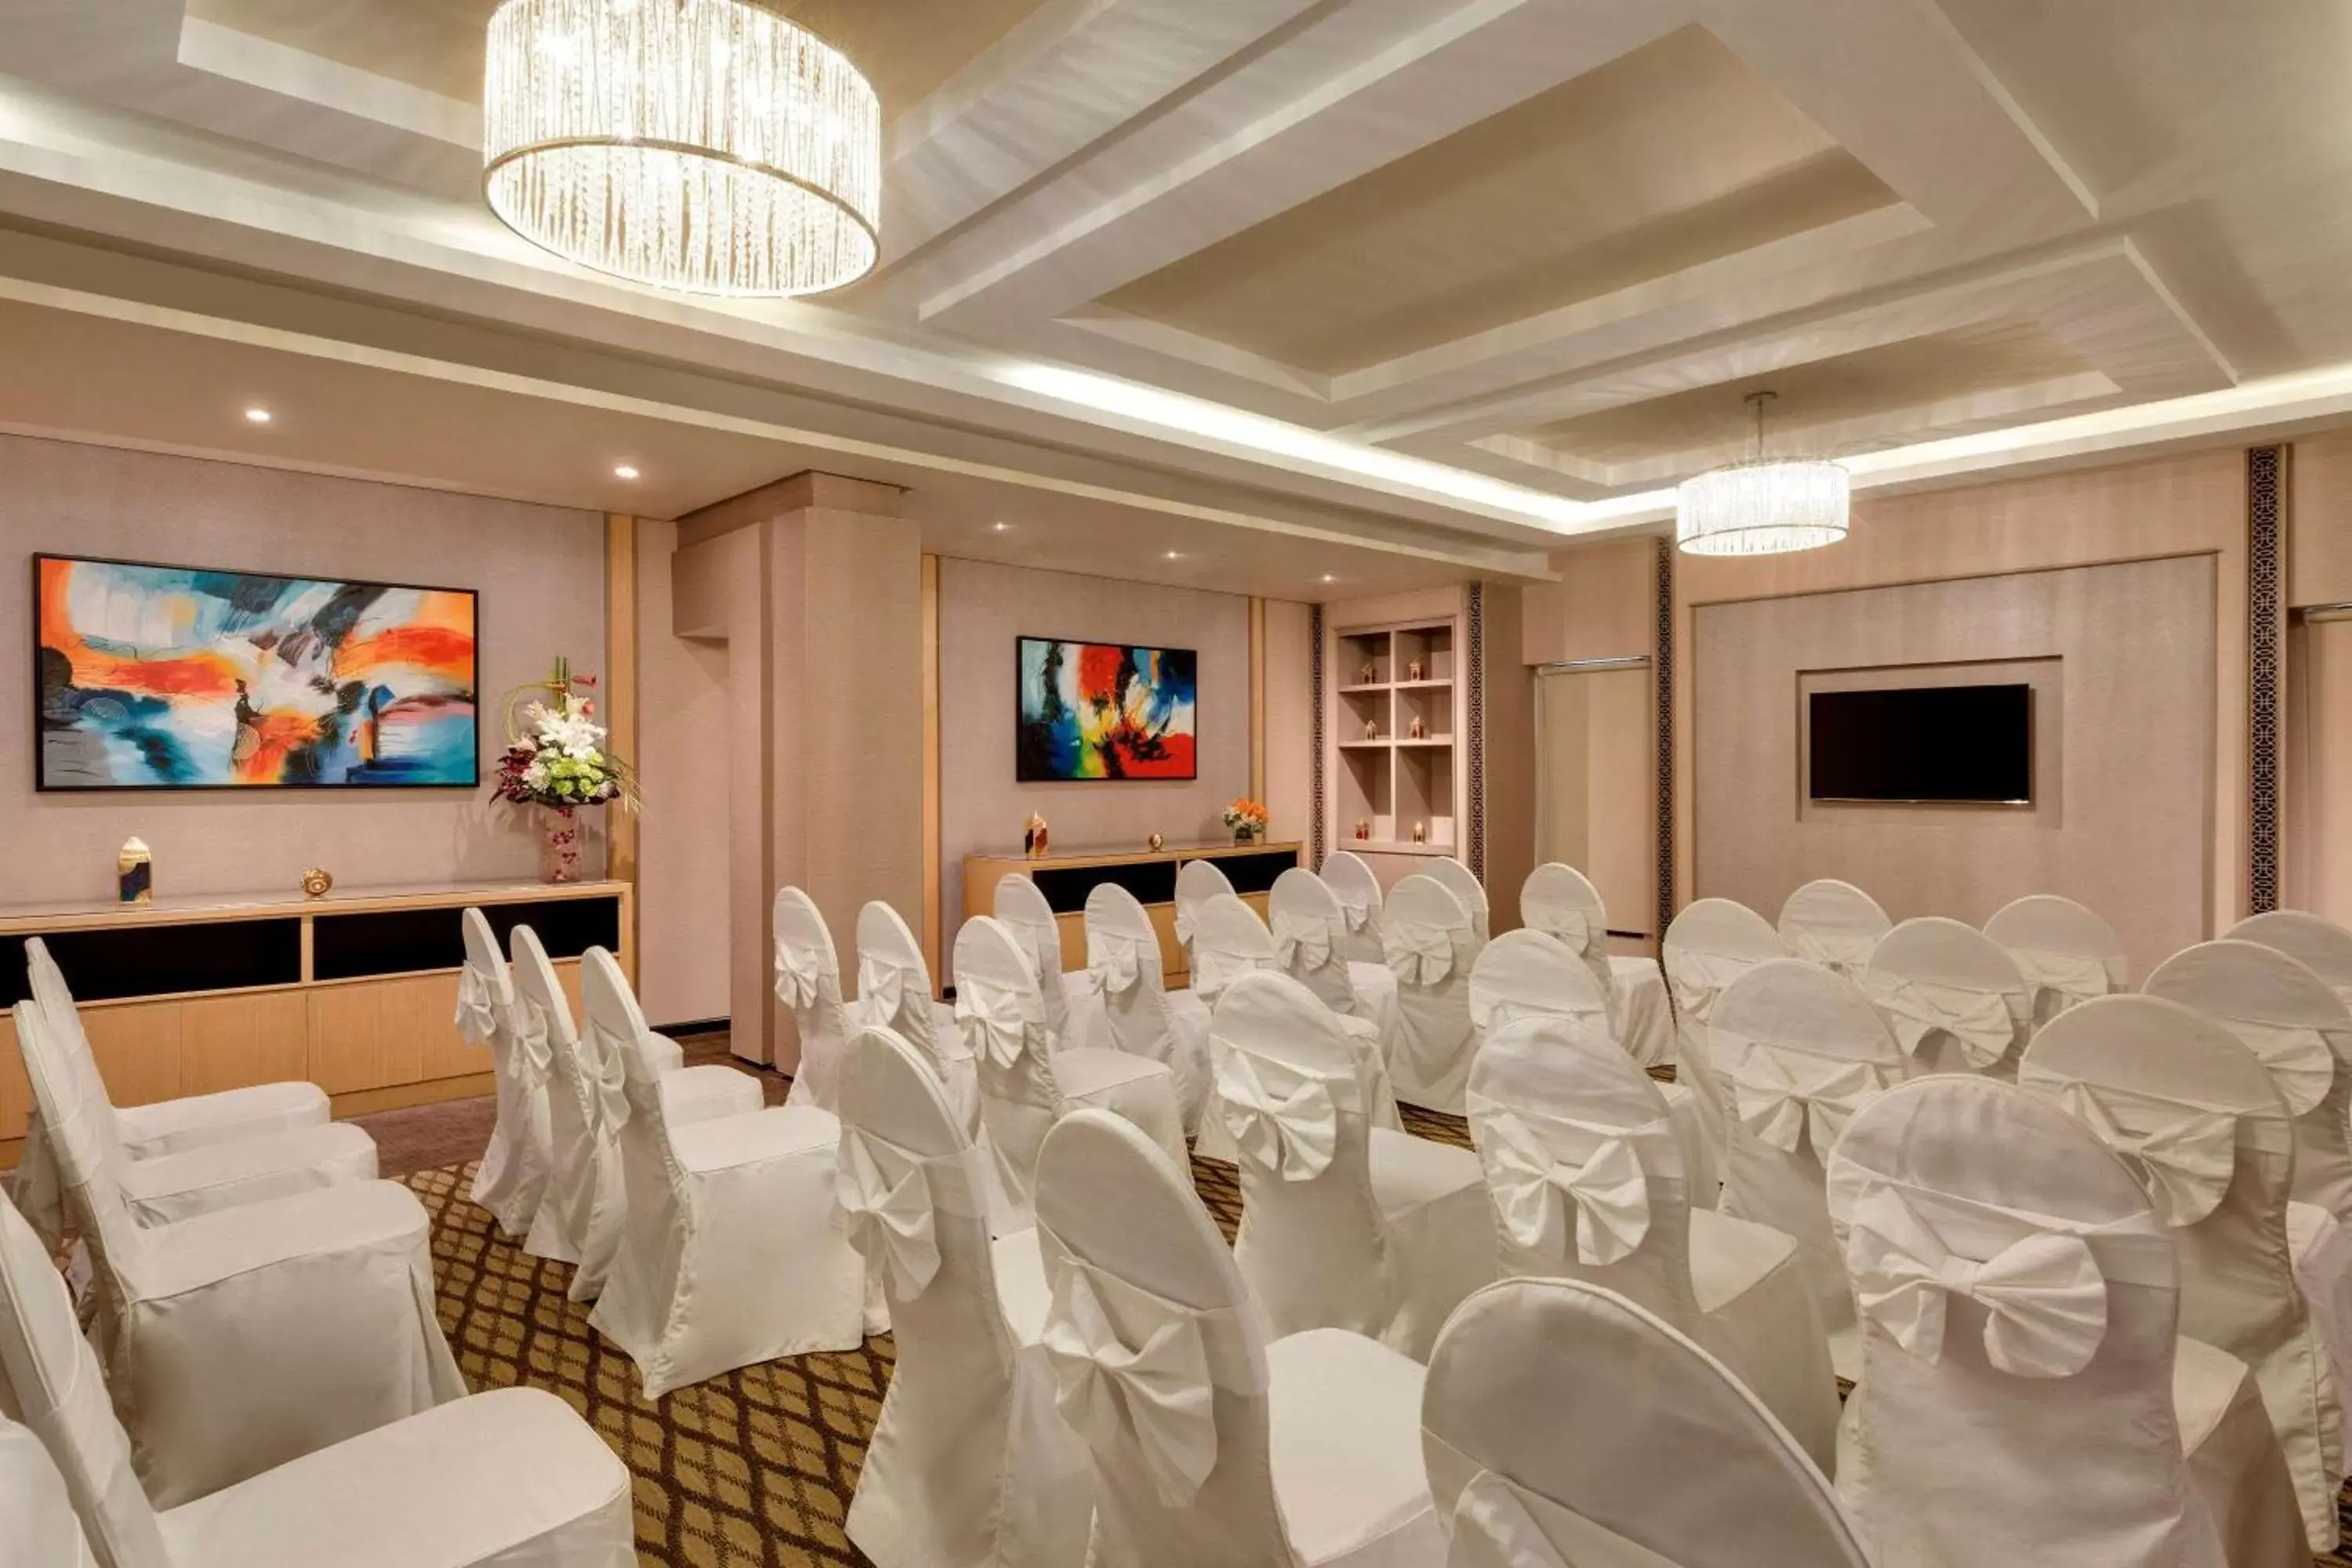 Meeting/conference room, Banquet Facilities in Ramada Hotel and Suites Amwaj Islands